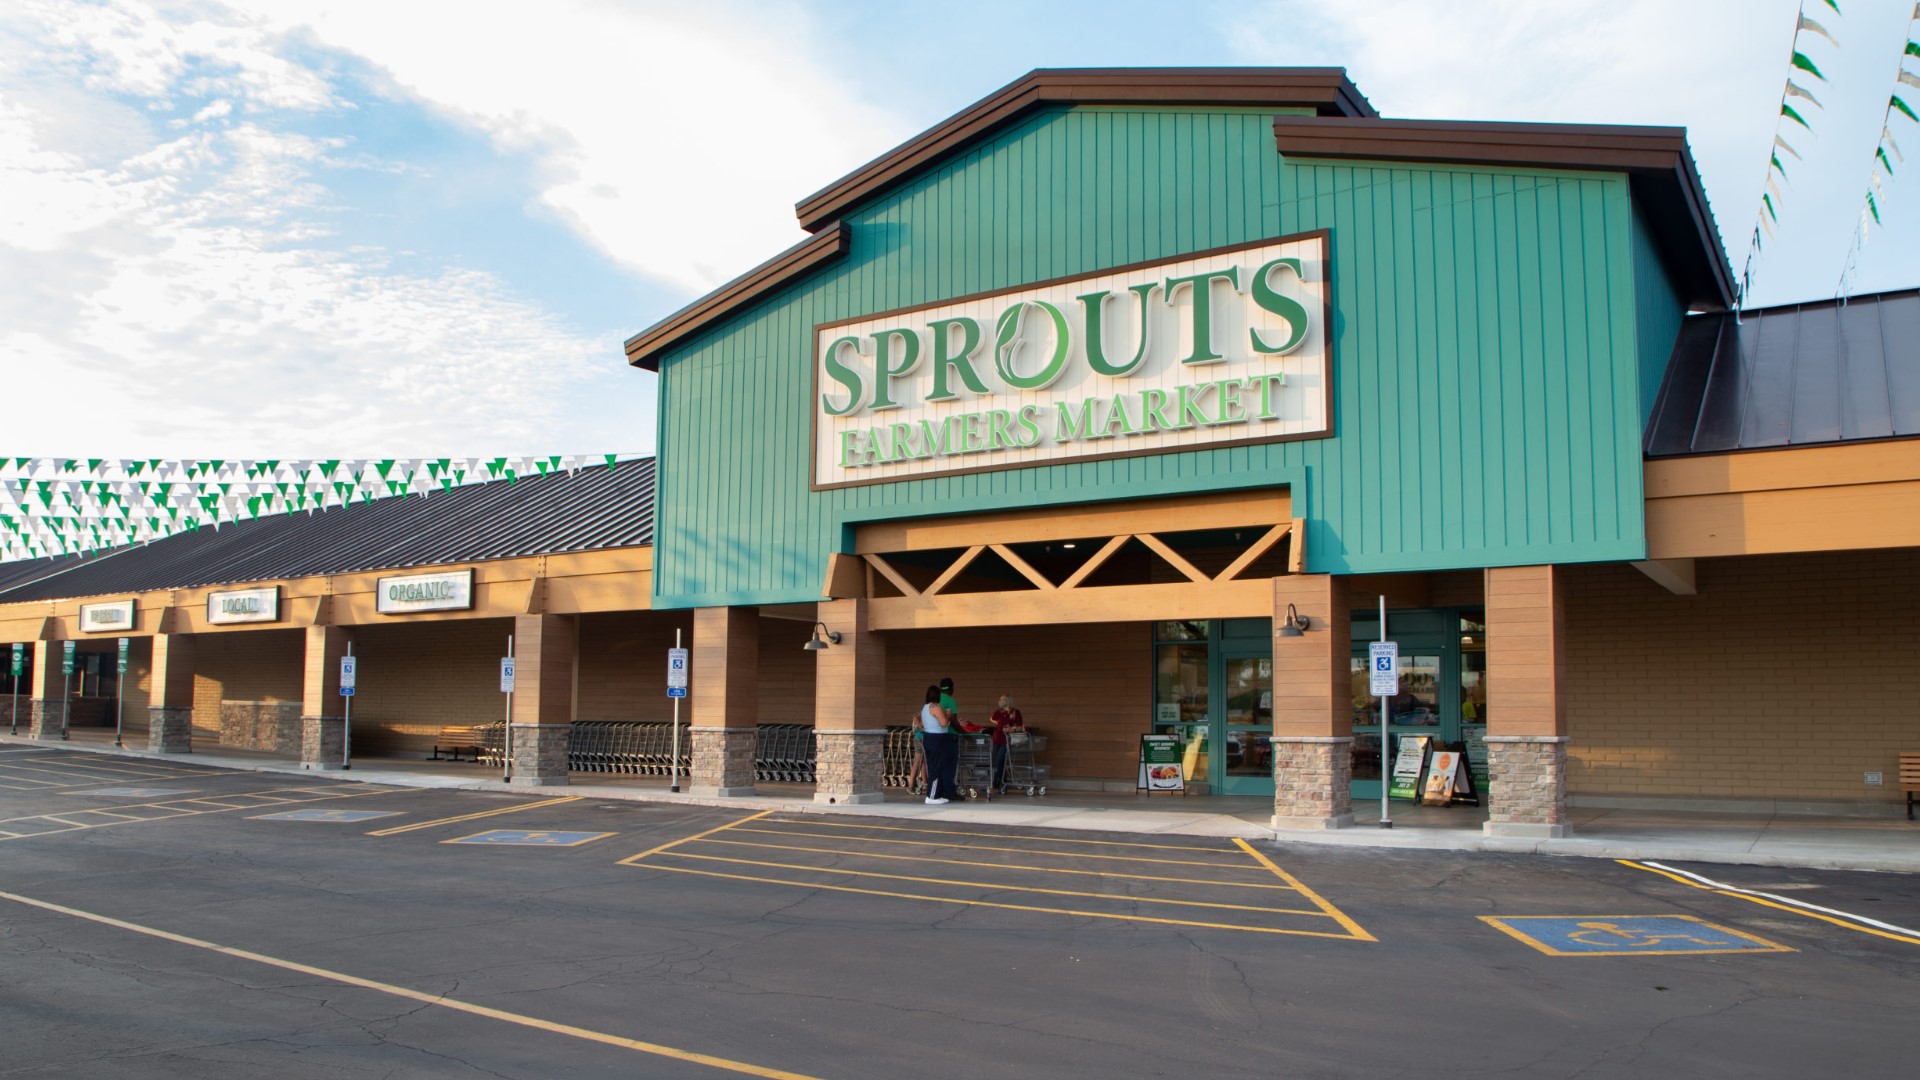 Sponsored by: Sprouts Farmers Market. Kristen gets a tour of the new Sprouts Farmers Market in Burtonsville, Maryland. For more info go to sprouts.com.